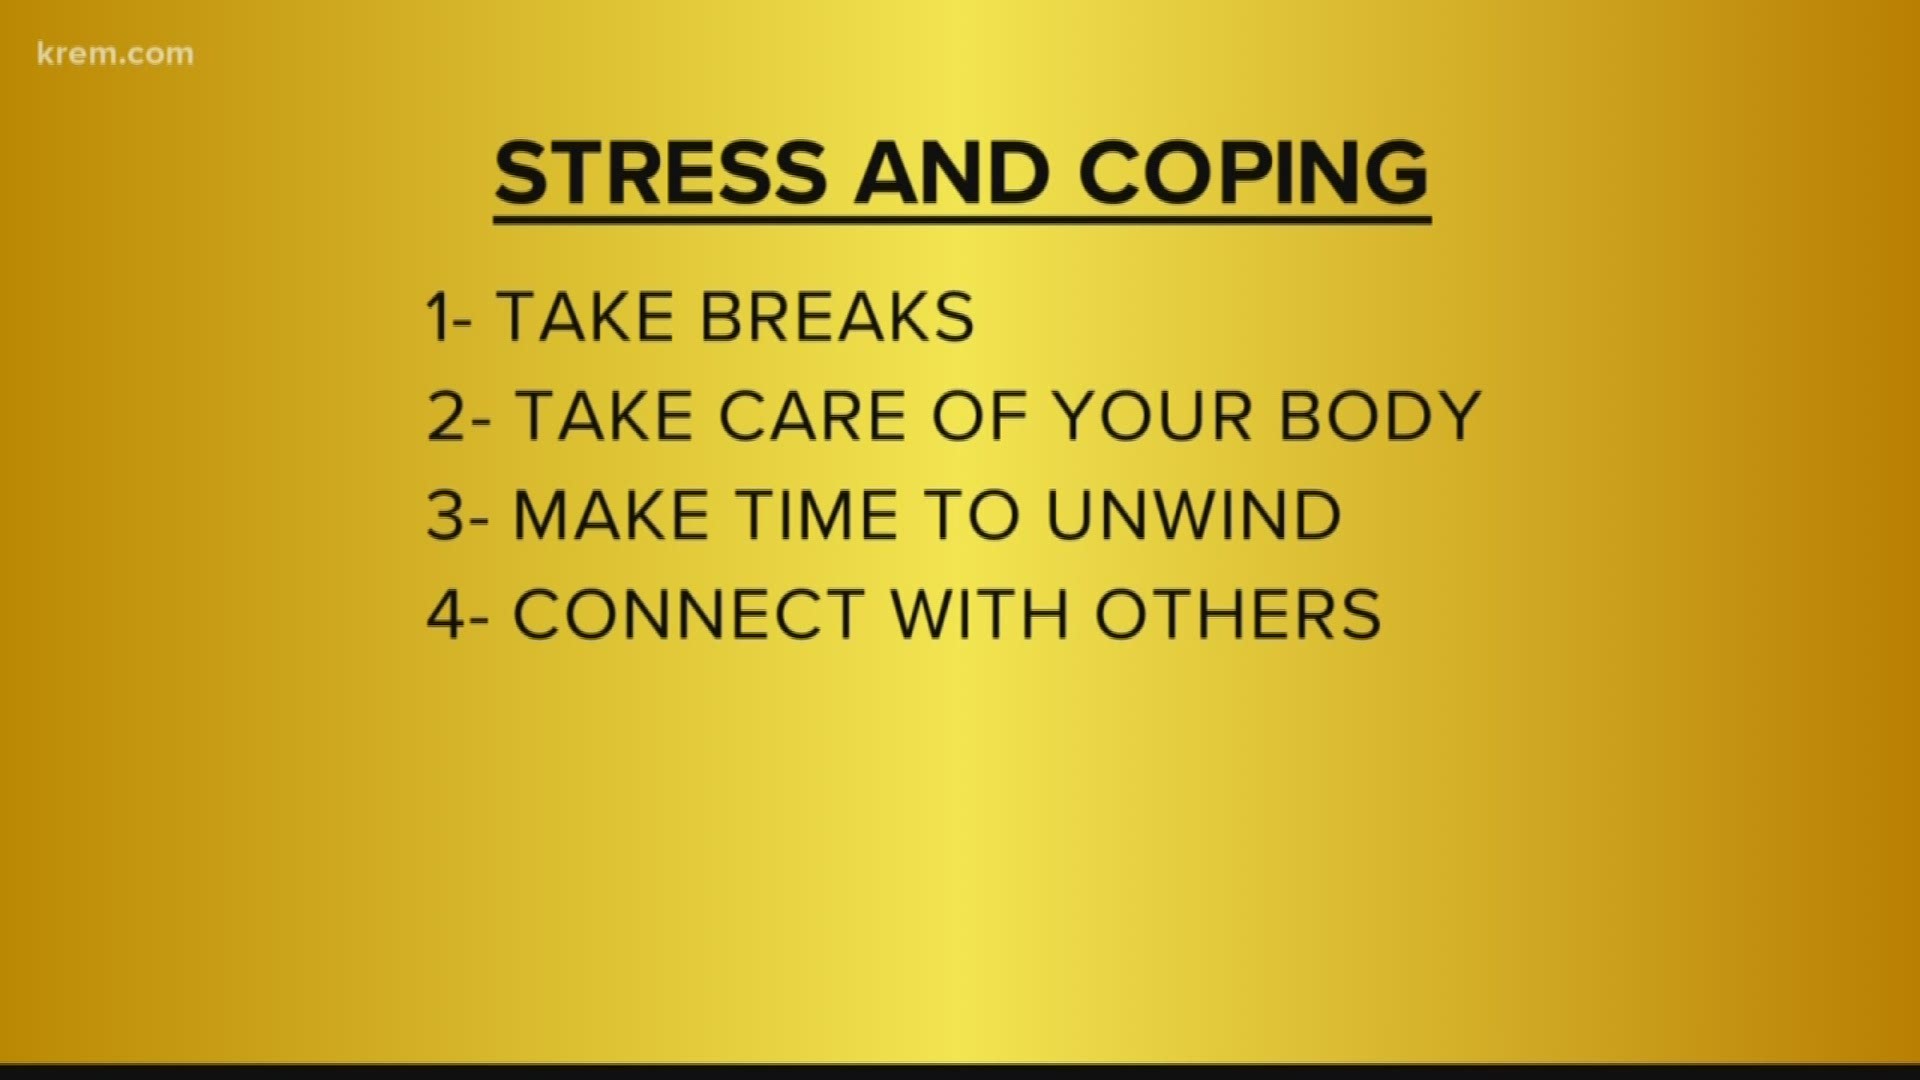 There are tools and resources to help you cope with stress surrounding the coronavirus outbreak.